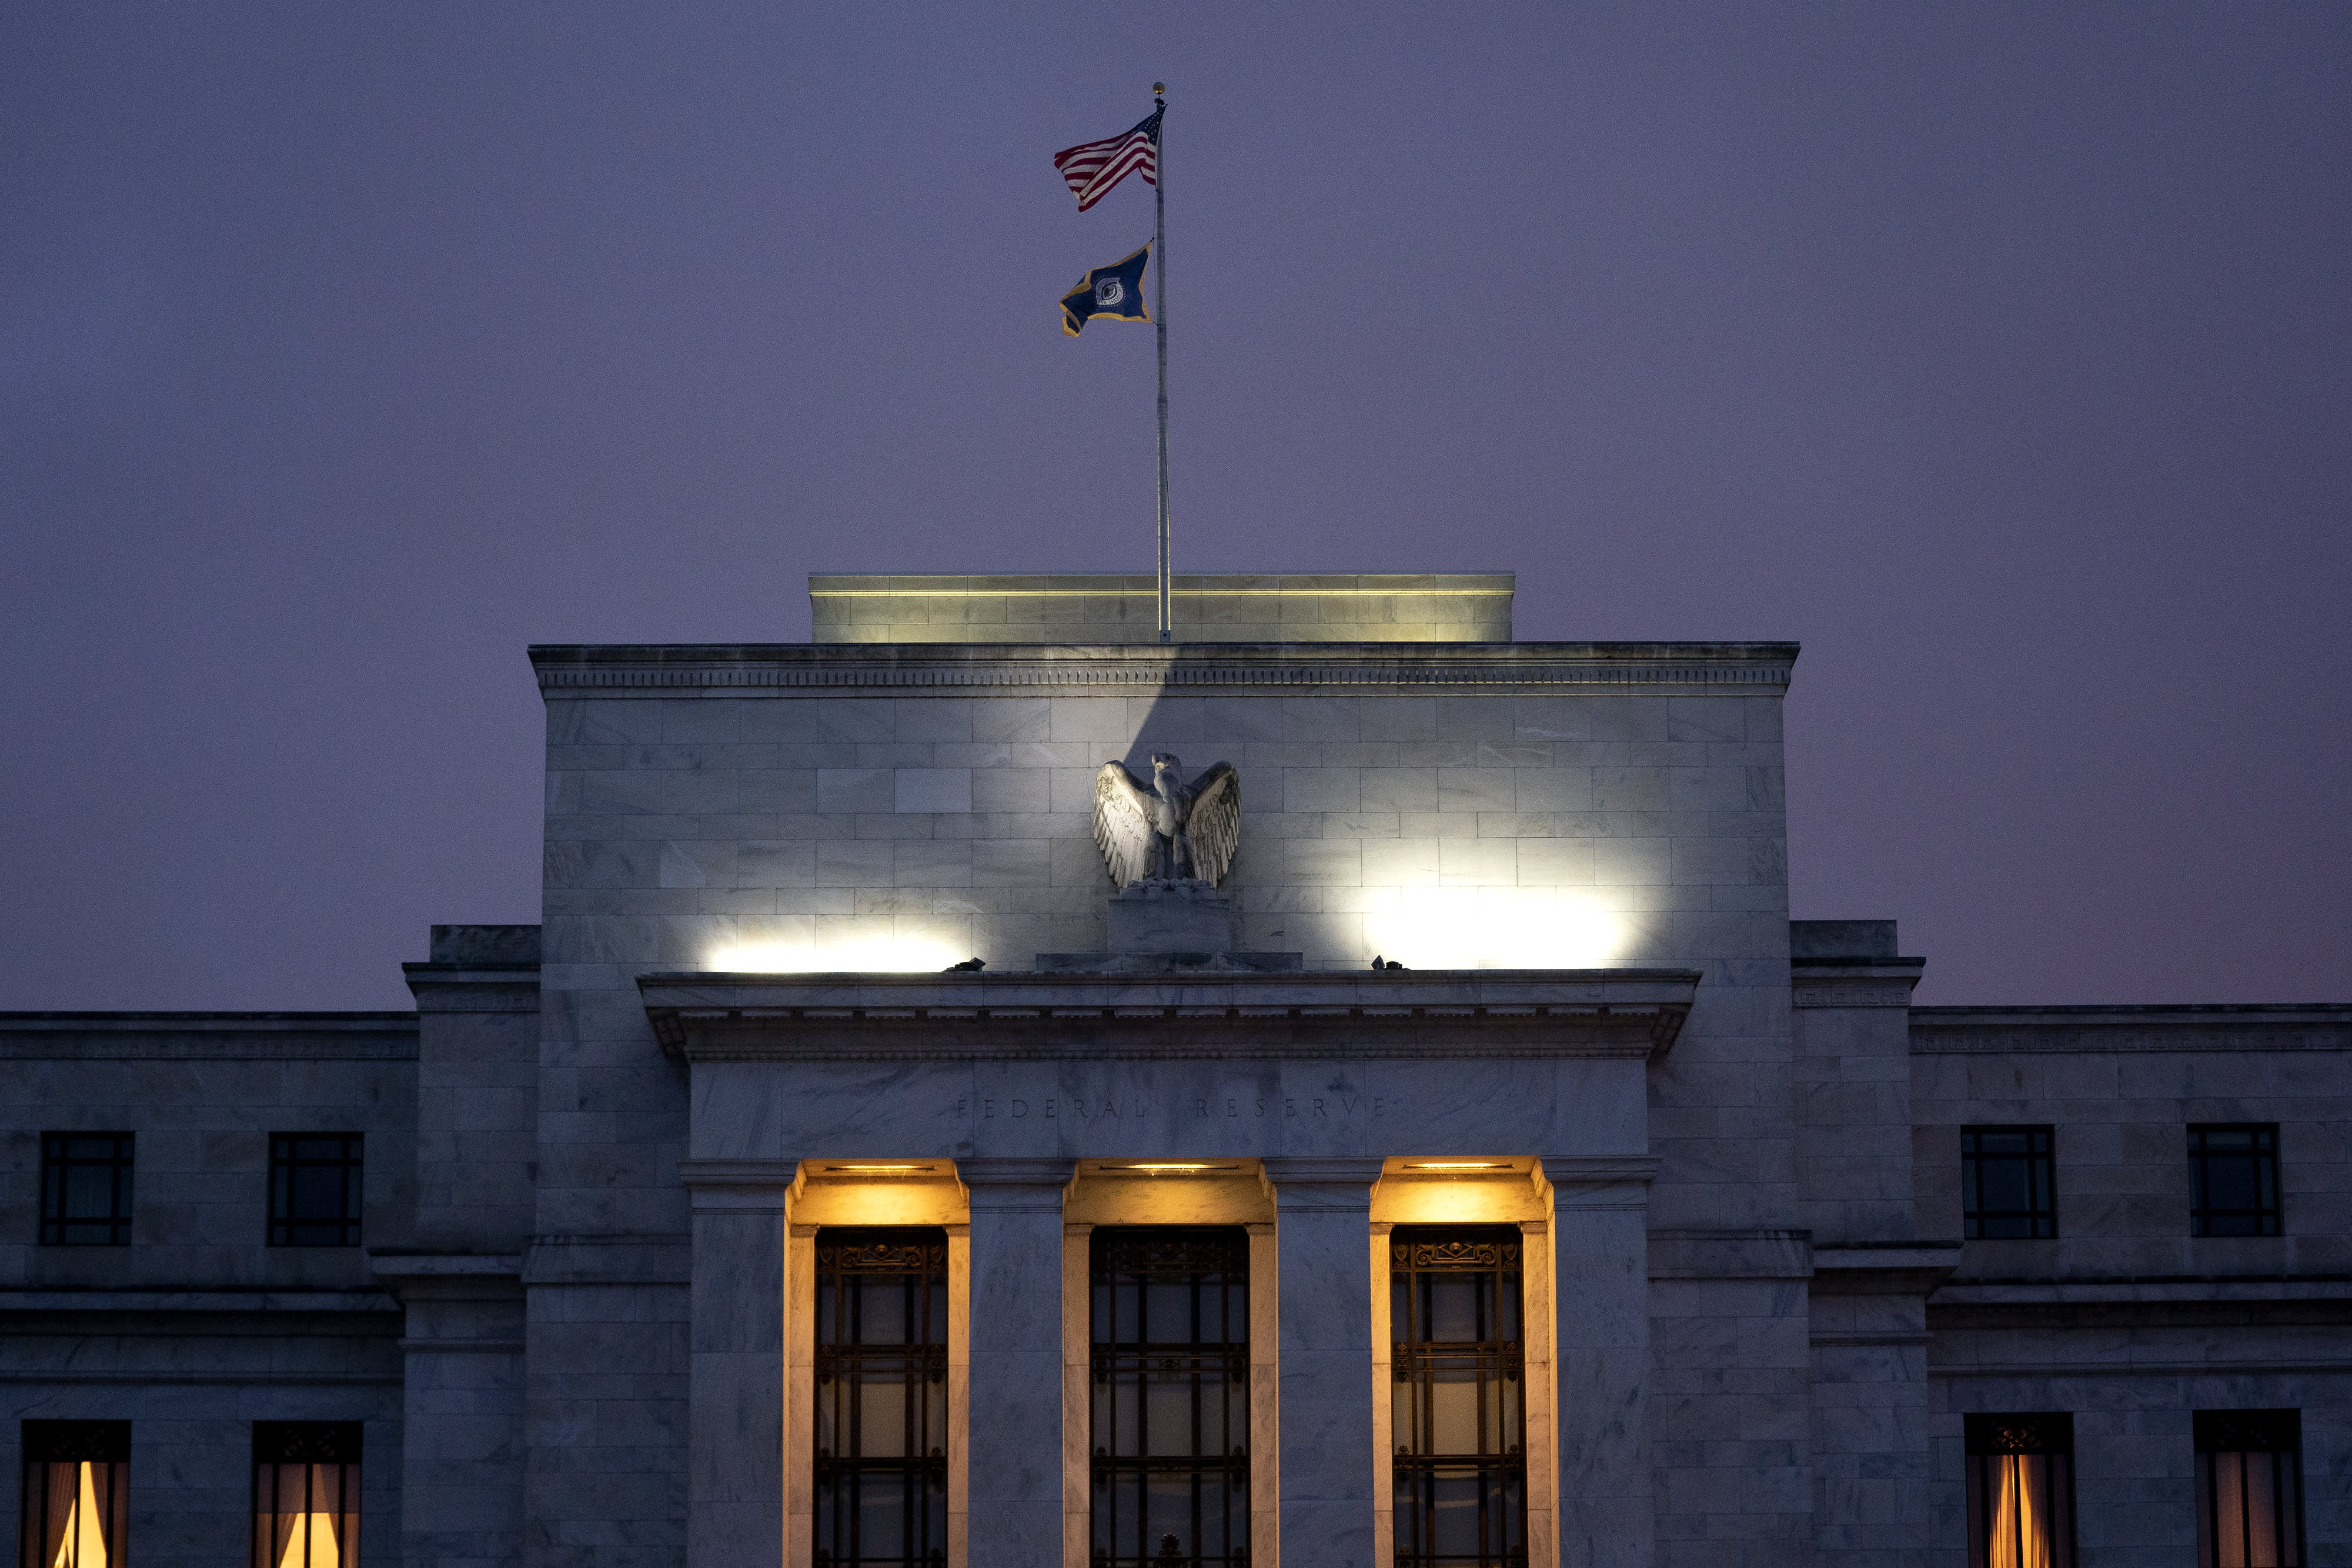 After years of being 'squeaky clean,' the Federal Reserve is surrounded by controversy